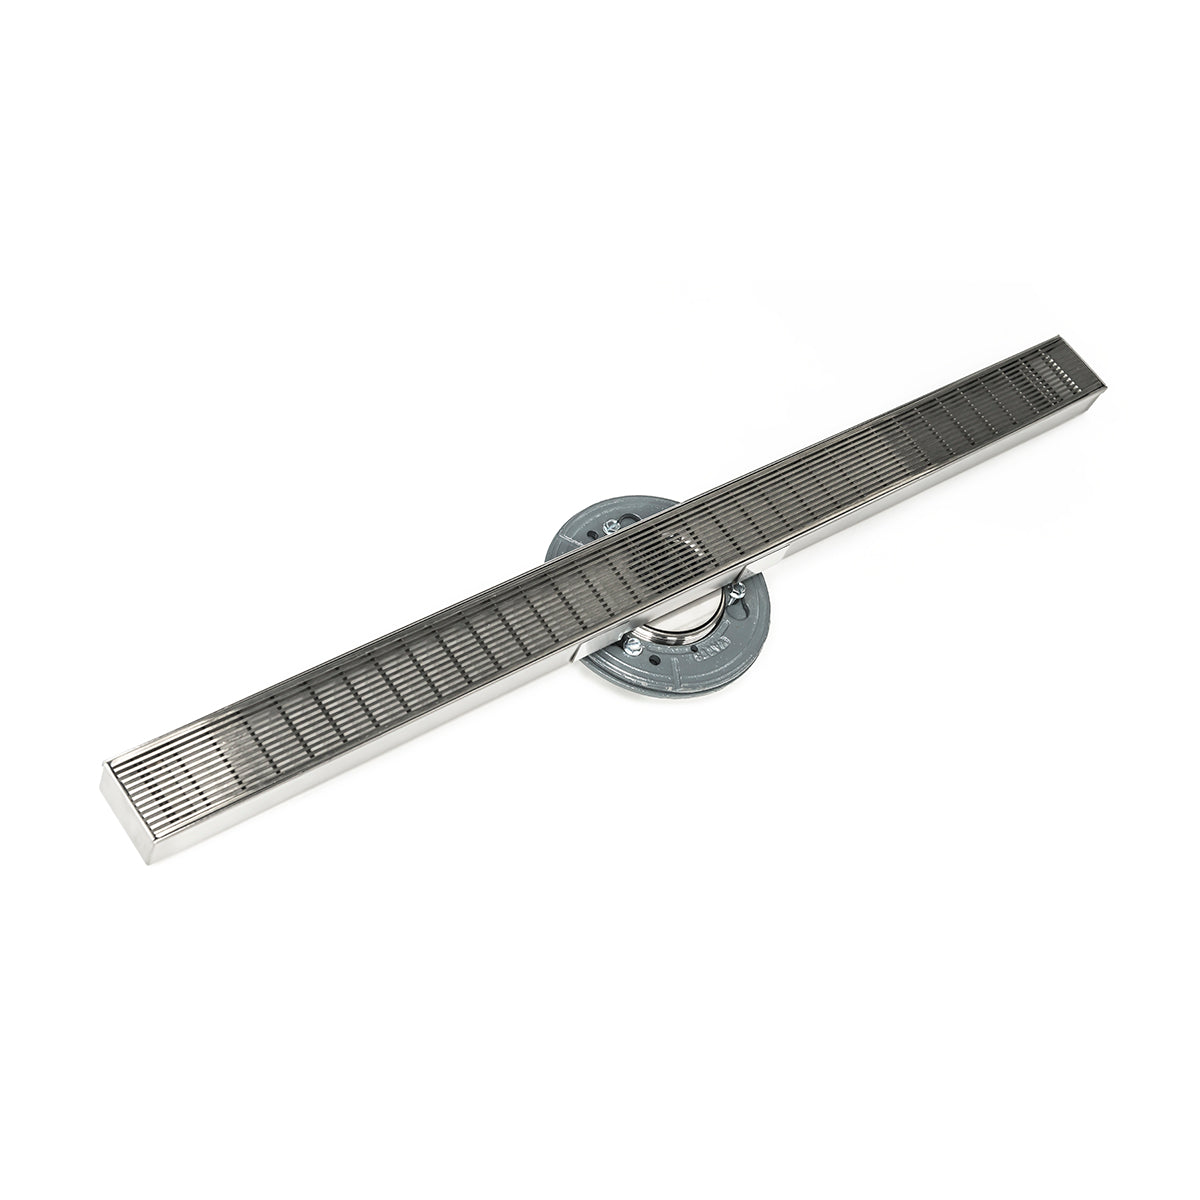 Infinity Drain 60" S-Stainless Steel Series High Flow Site Sizable Linear Drain Kit with 2 1/2" Wedge Wire Grate with ABS Drain Body, 3" Outlet